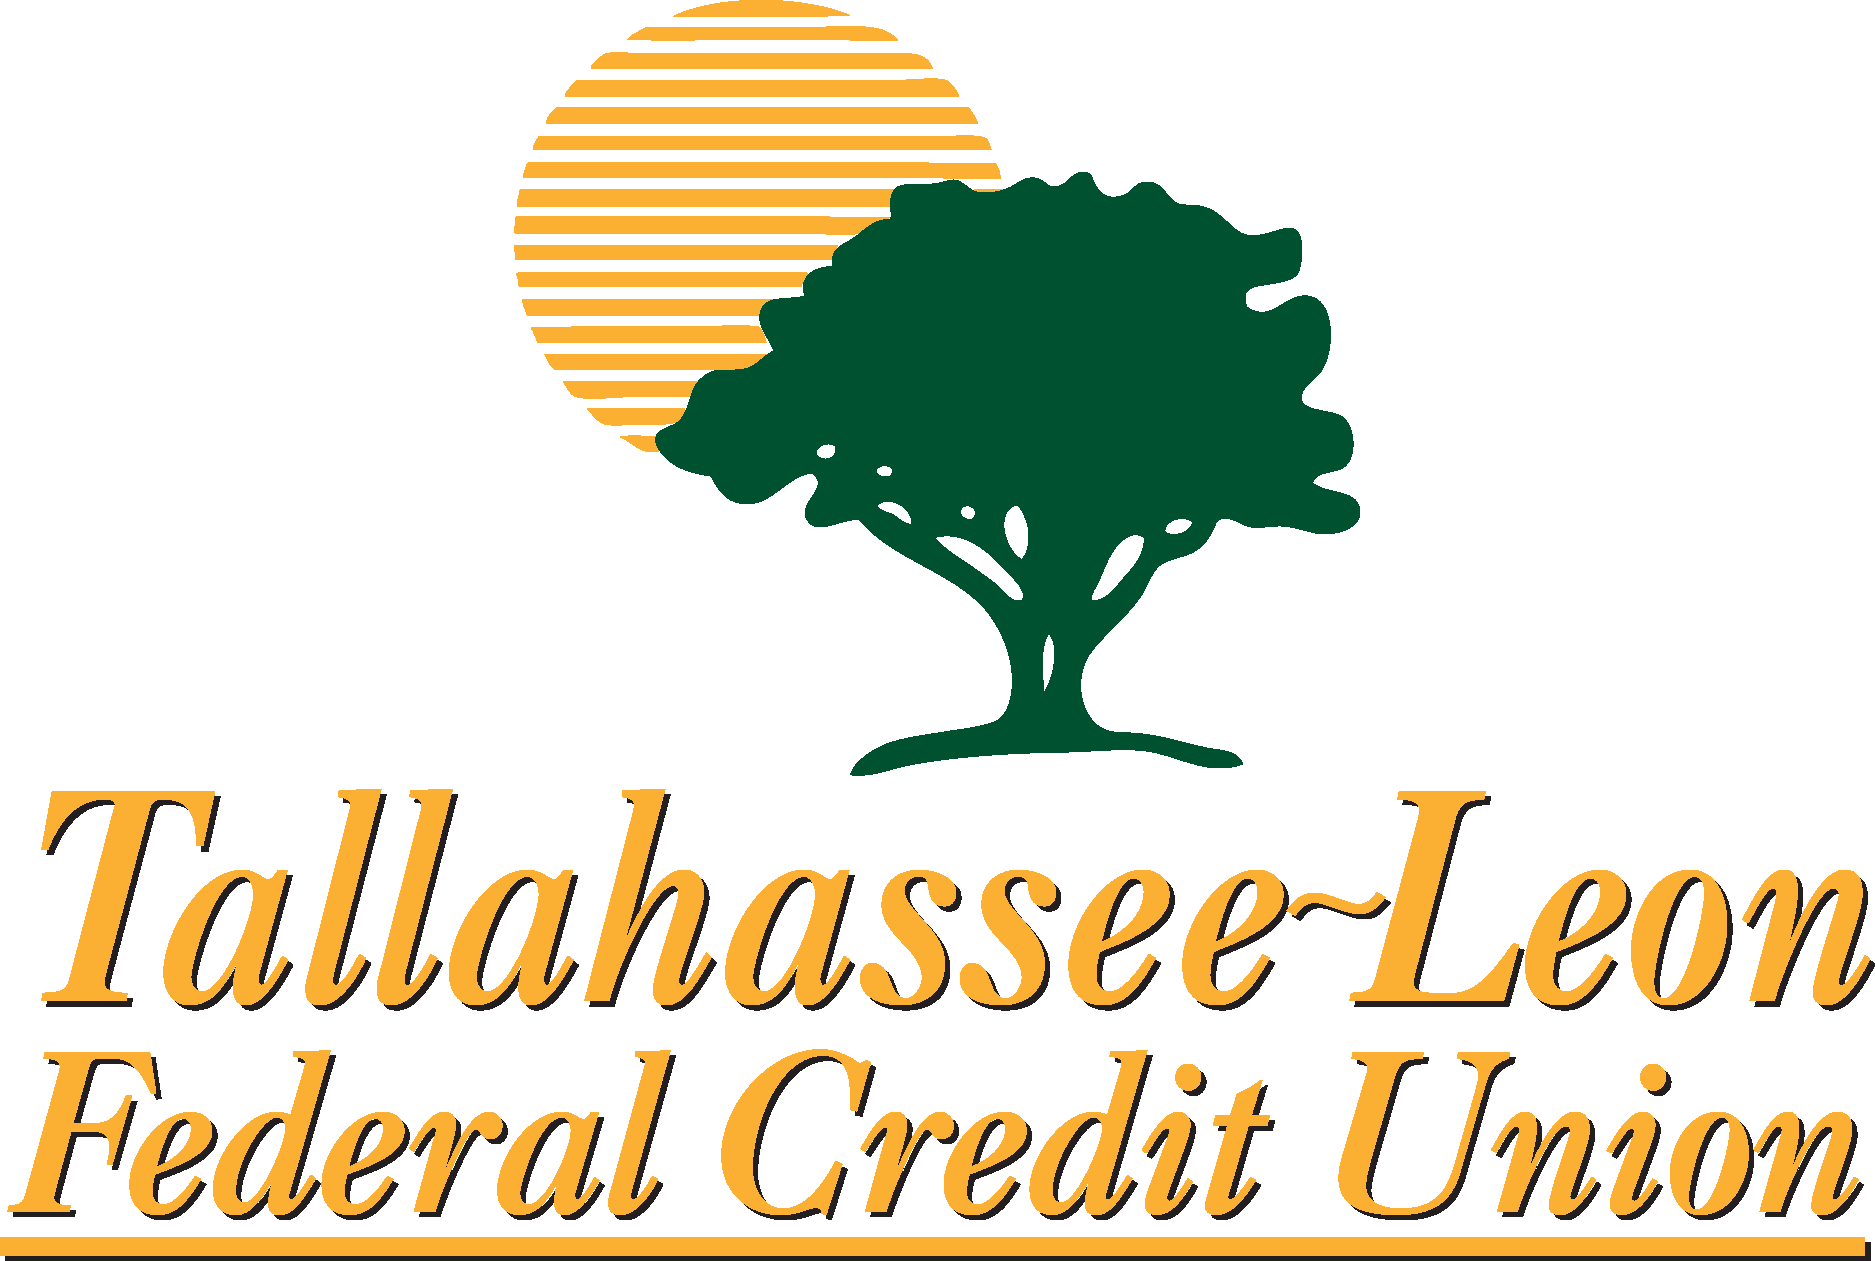 Tallahassee Leon Federal Credit Union Logo Vector - (.Ai .PNG .SVG .EPS ...